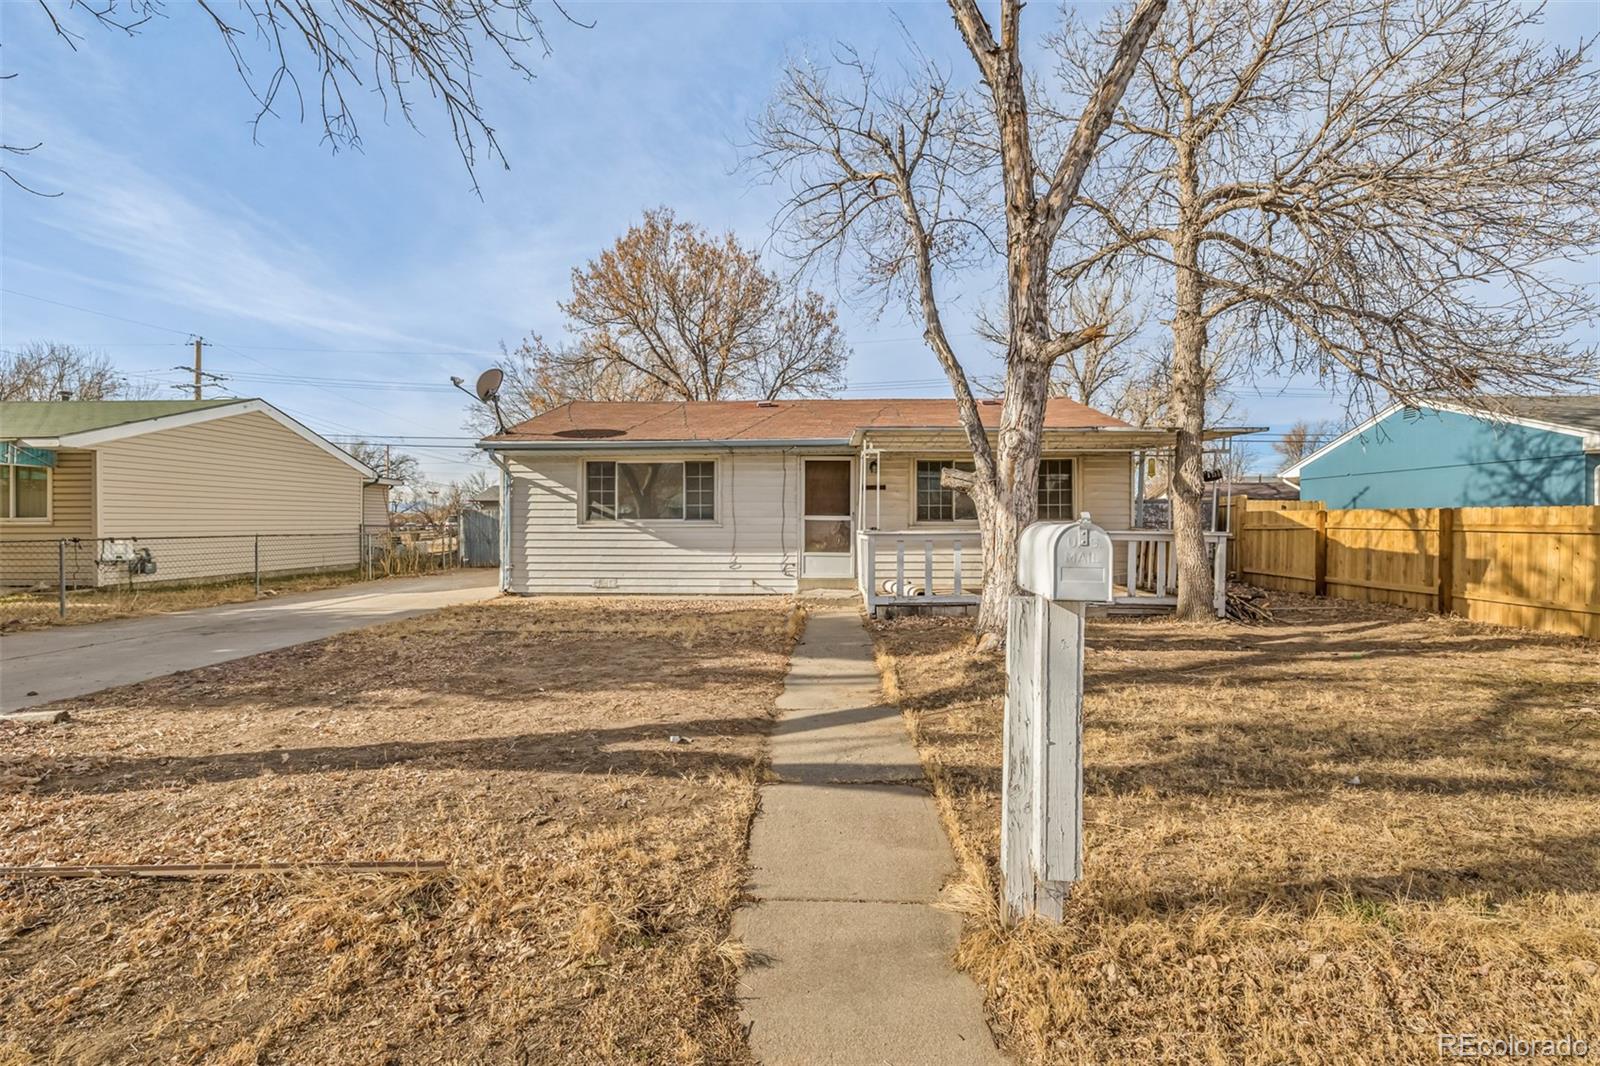 6451  porter way, commerce city sold home. Closed on 2024-02-12 for $275,000.